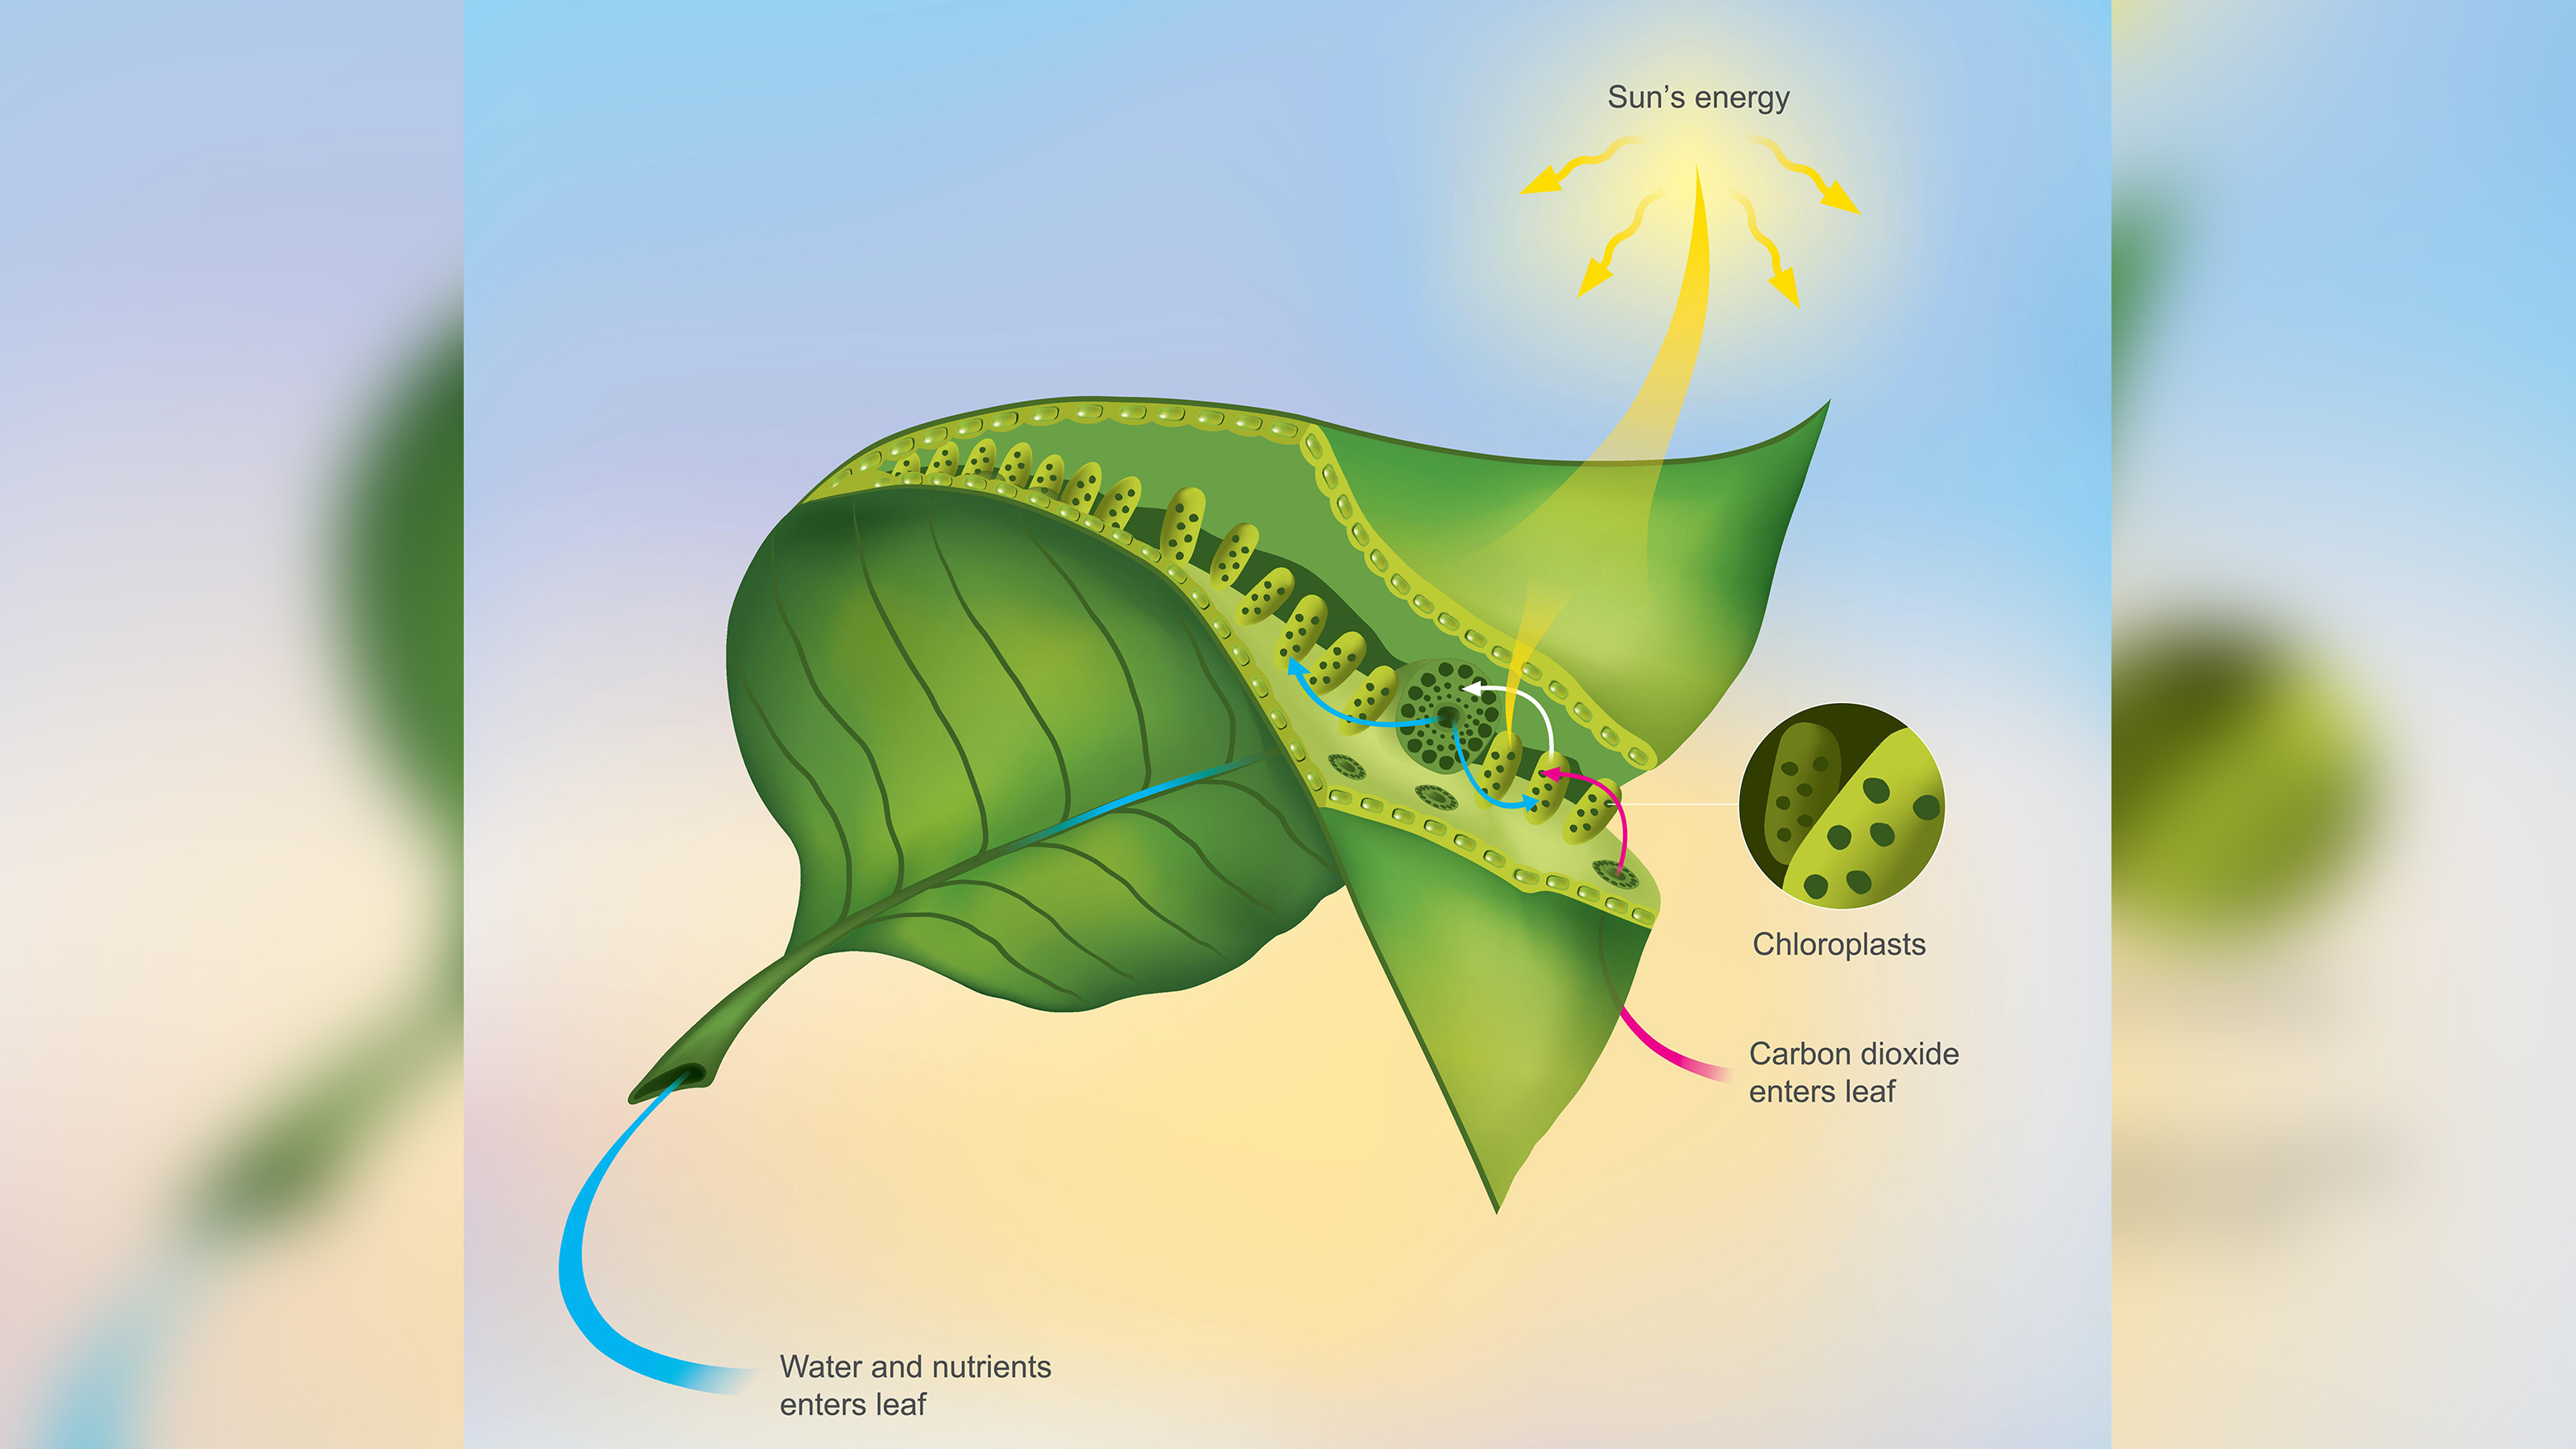 This diagram shows the inside of a leaf and how photosynthesis occurs inside the chloroplasts there.